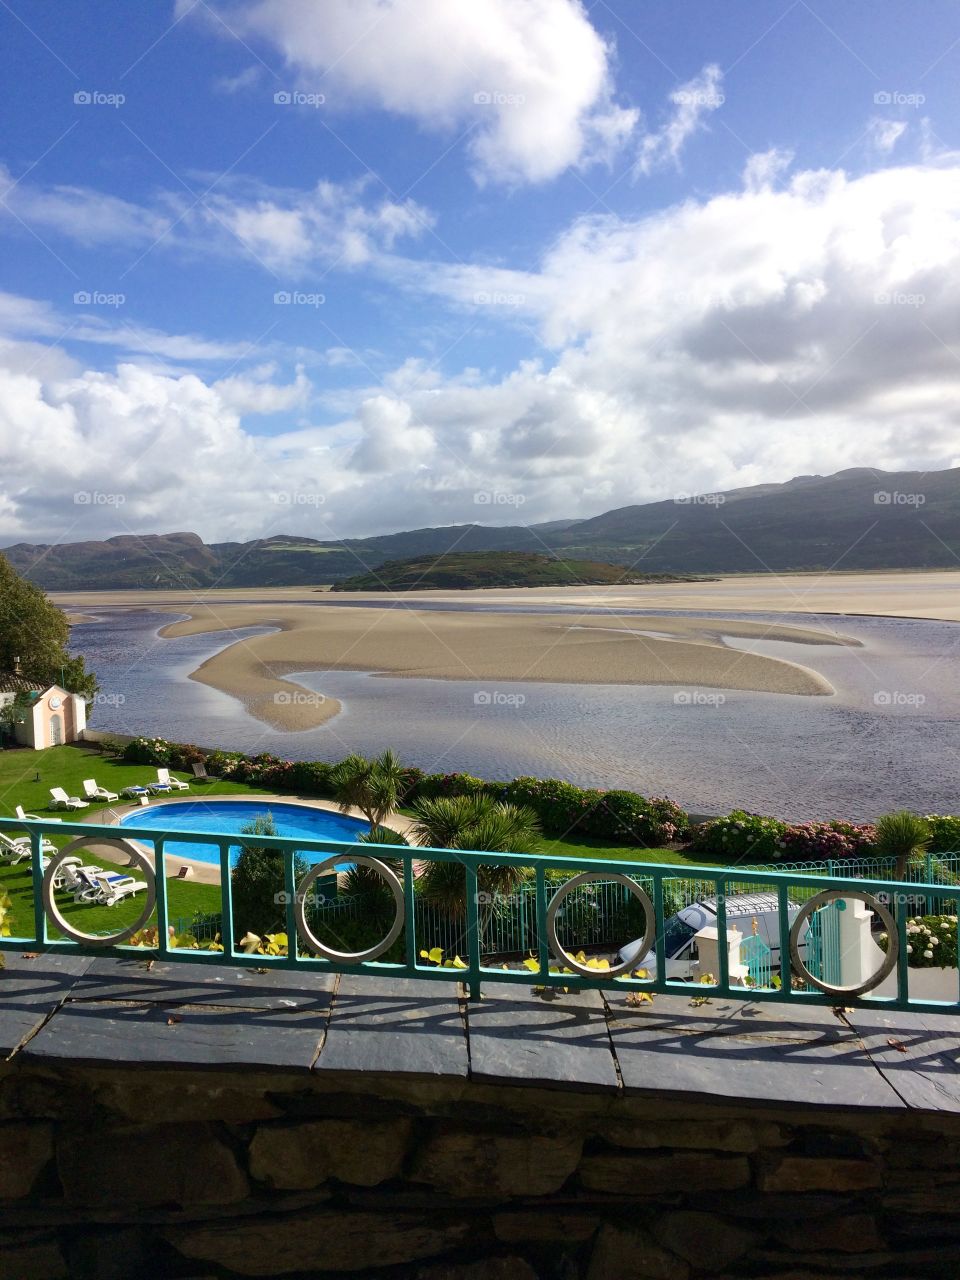 Port Meirion in the summer. Would love to be lounging by that pool in the distance. 